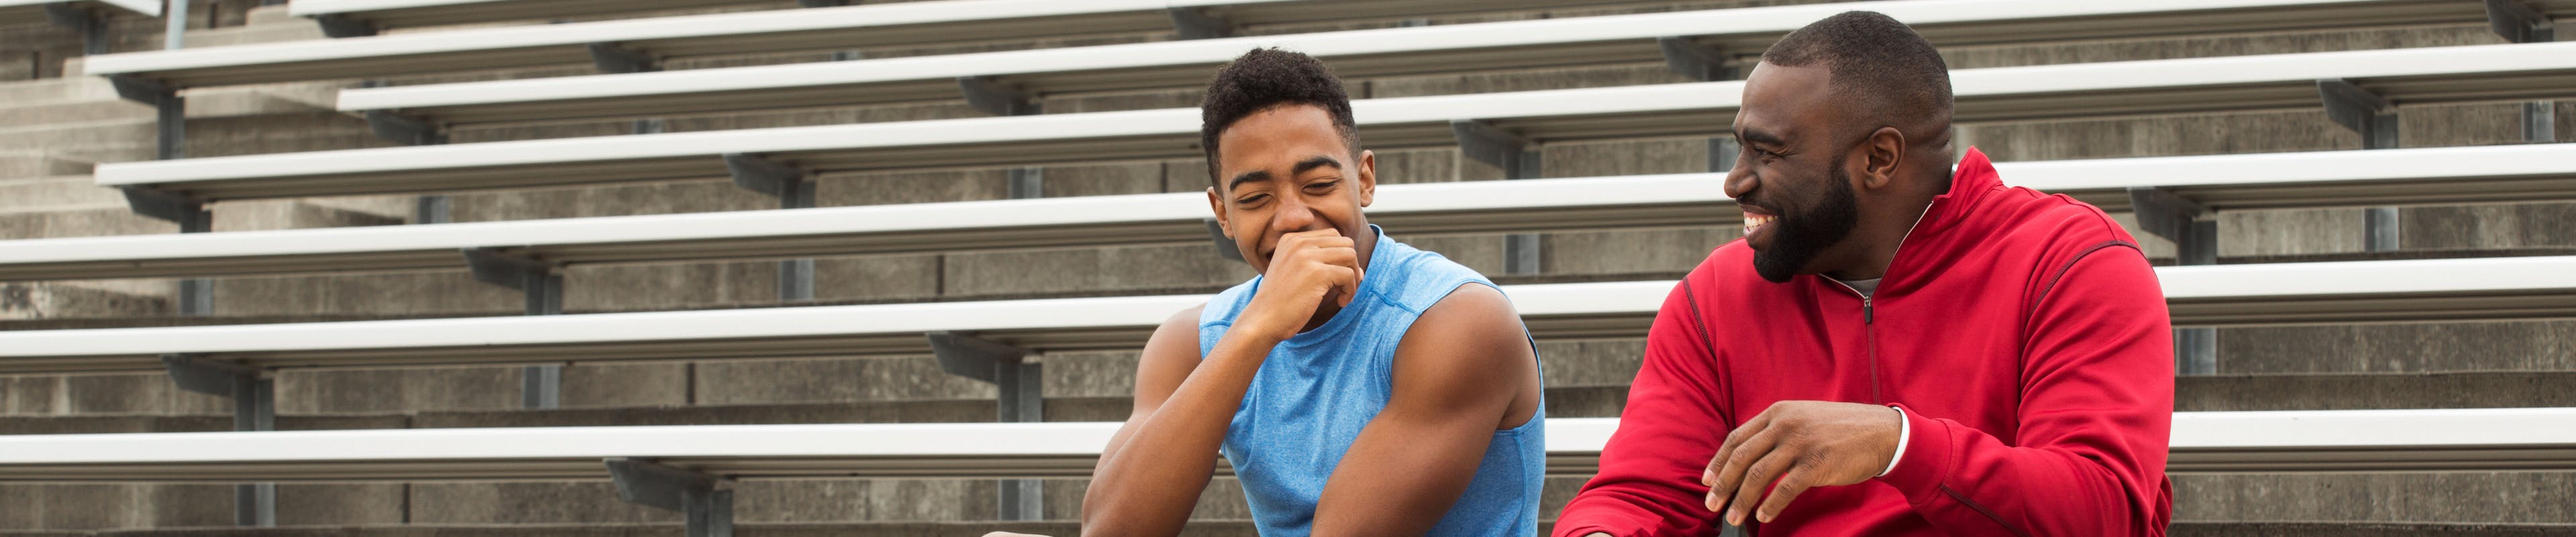 An adult man sitting with young male on the bleachers